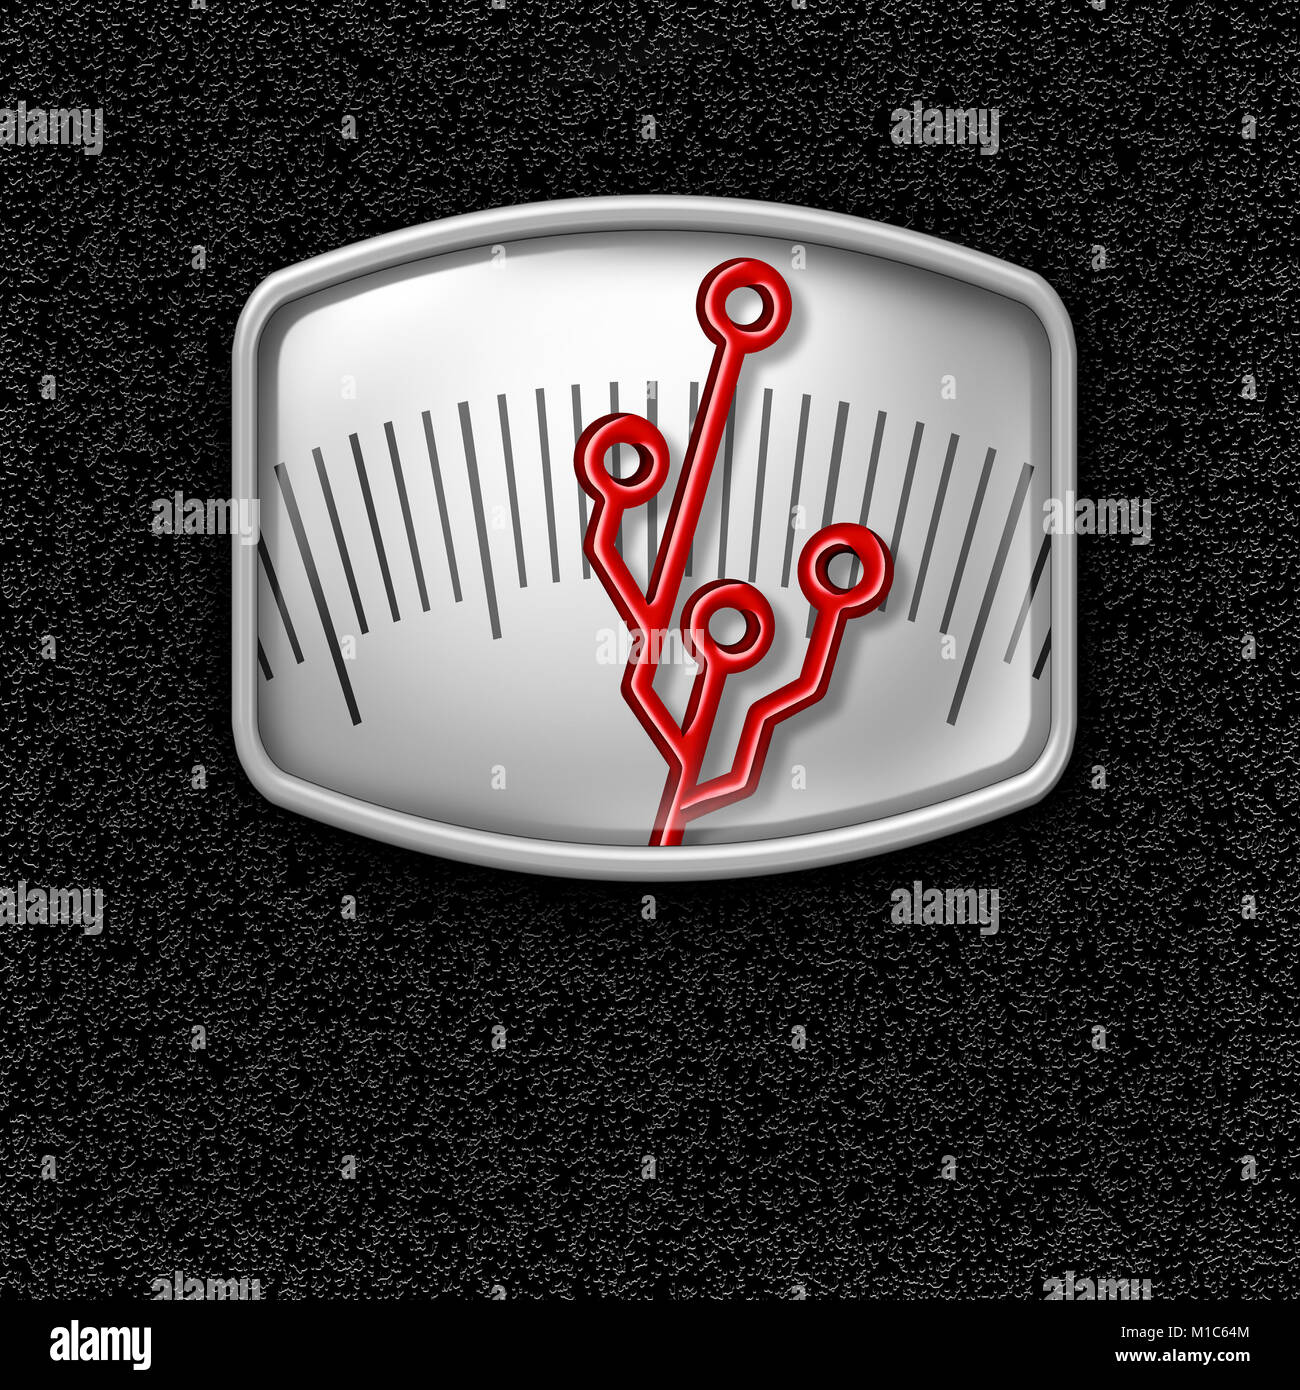 Dieting technology and diet digital weight loss assistant electronics concept as a scale with a circuit shaped needle indicator. Stock Photo